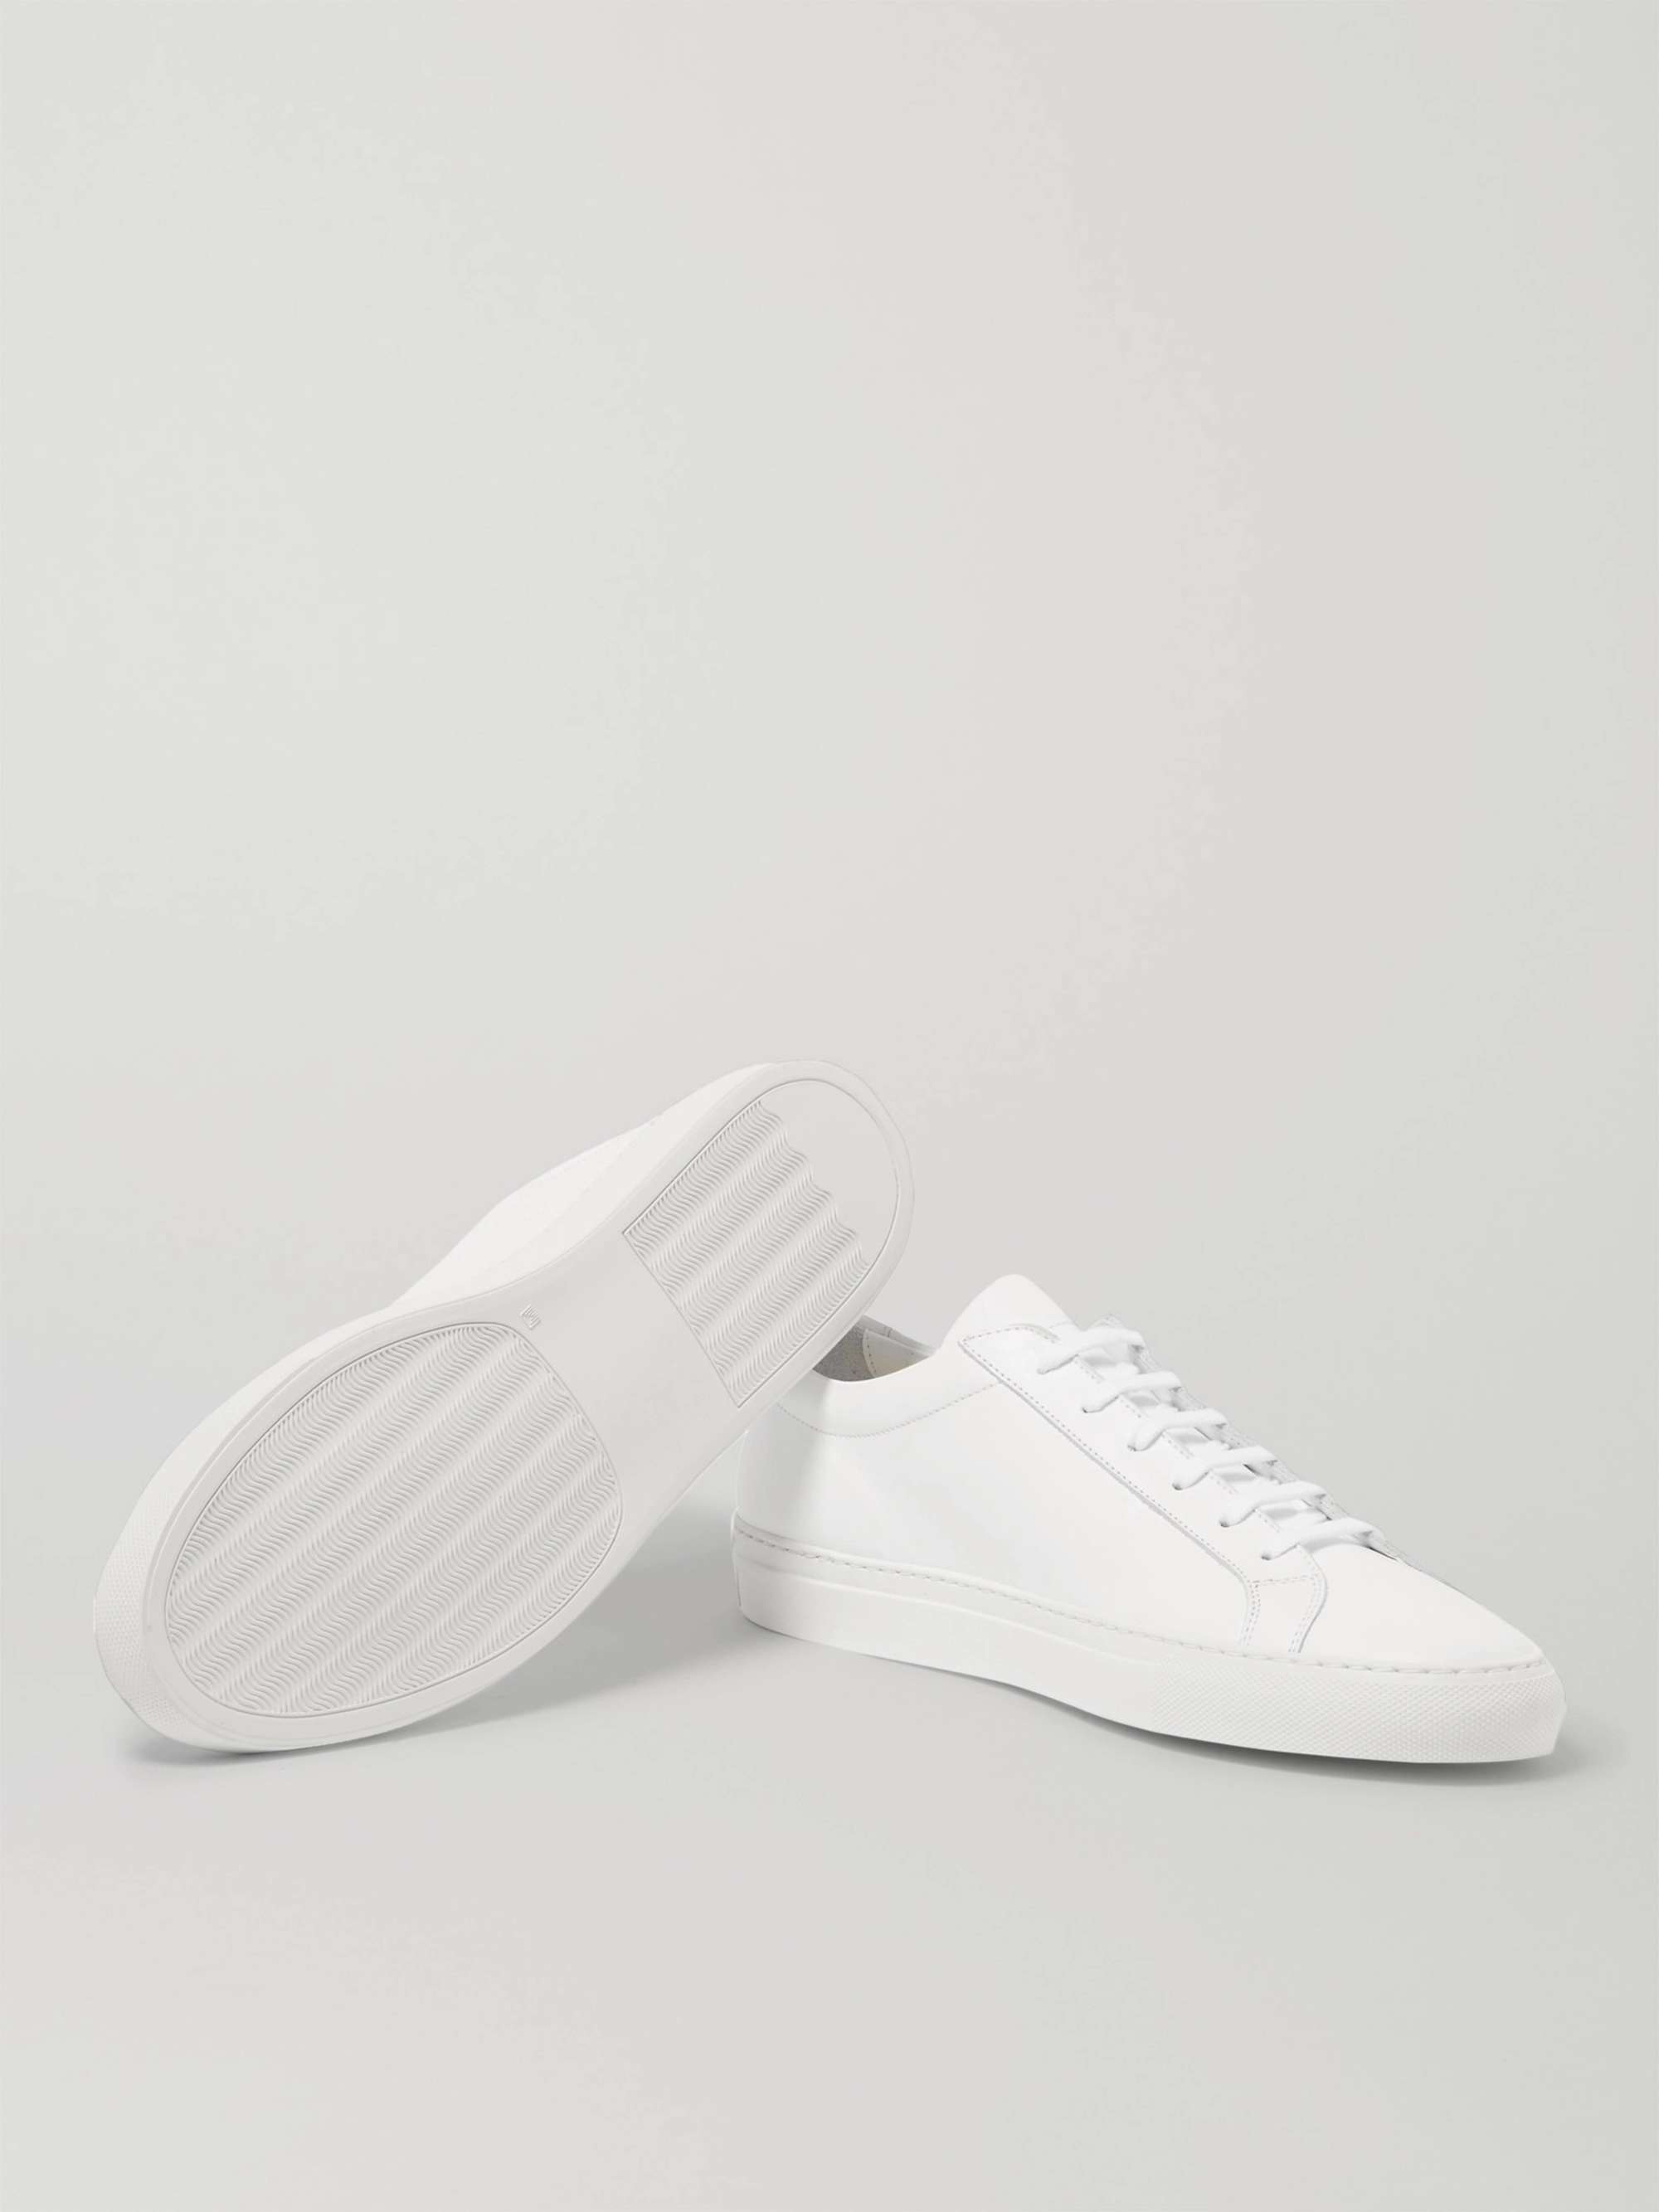 The beginning Brim terrorism White Original Achilles Leather Sneakers | COMMON PROJECTS | MR PORTER